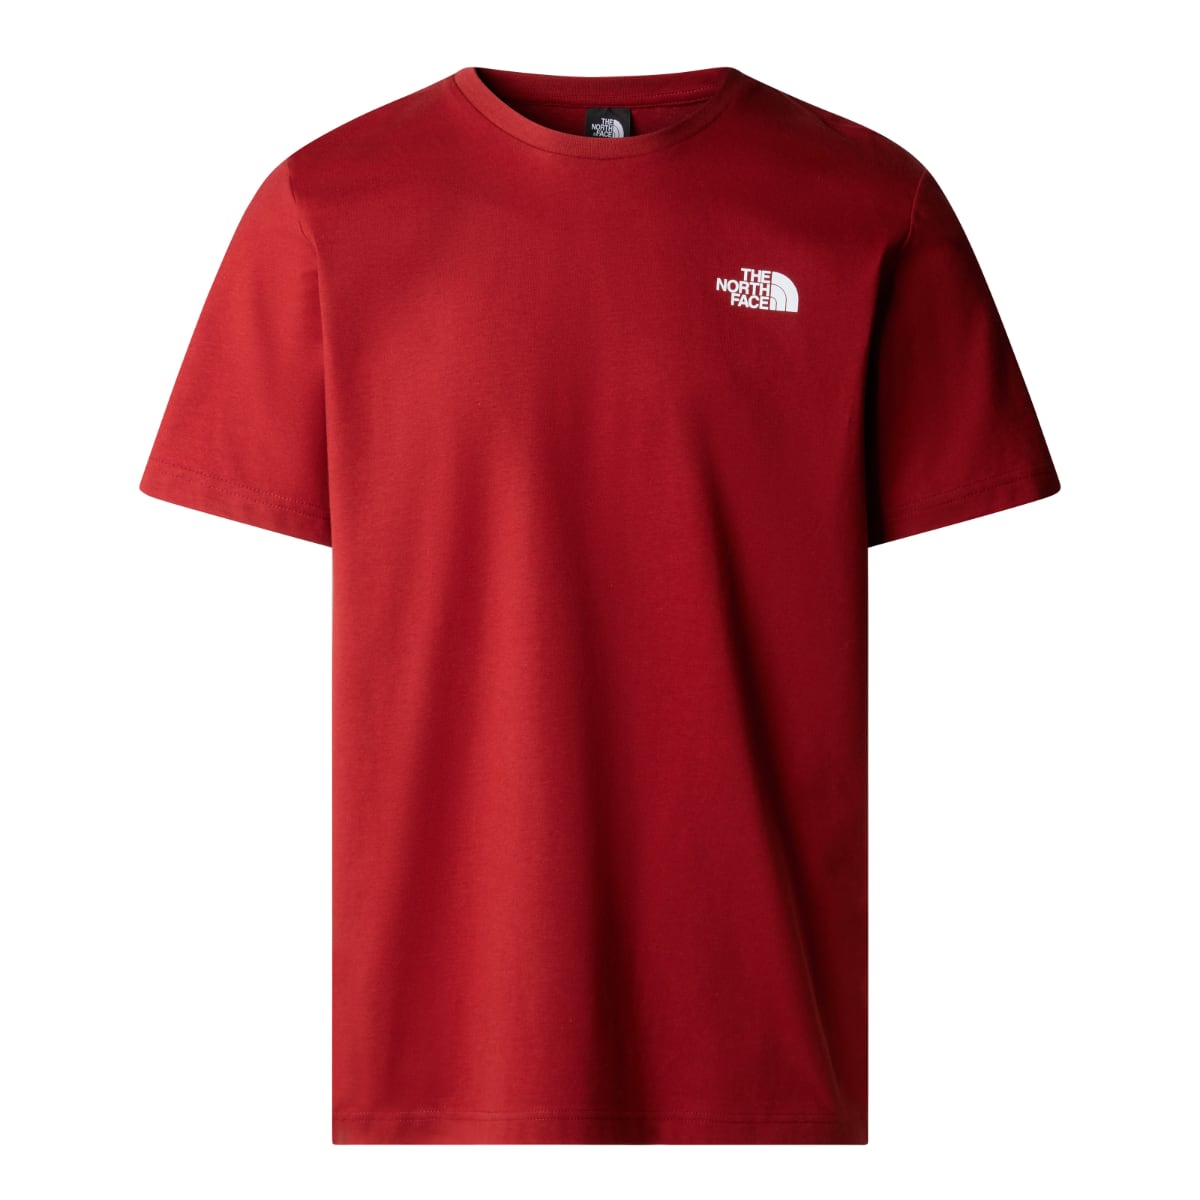 The North Face Redbox Men's T-Shirt | Iron Red